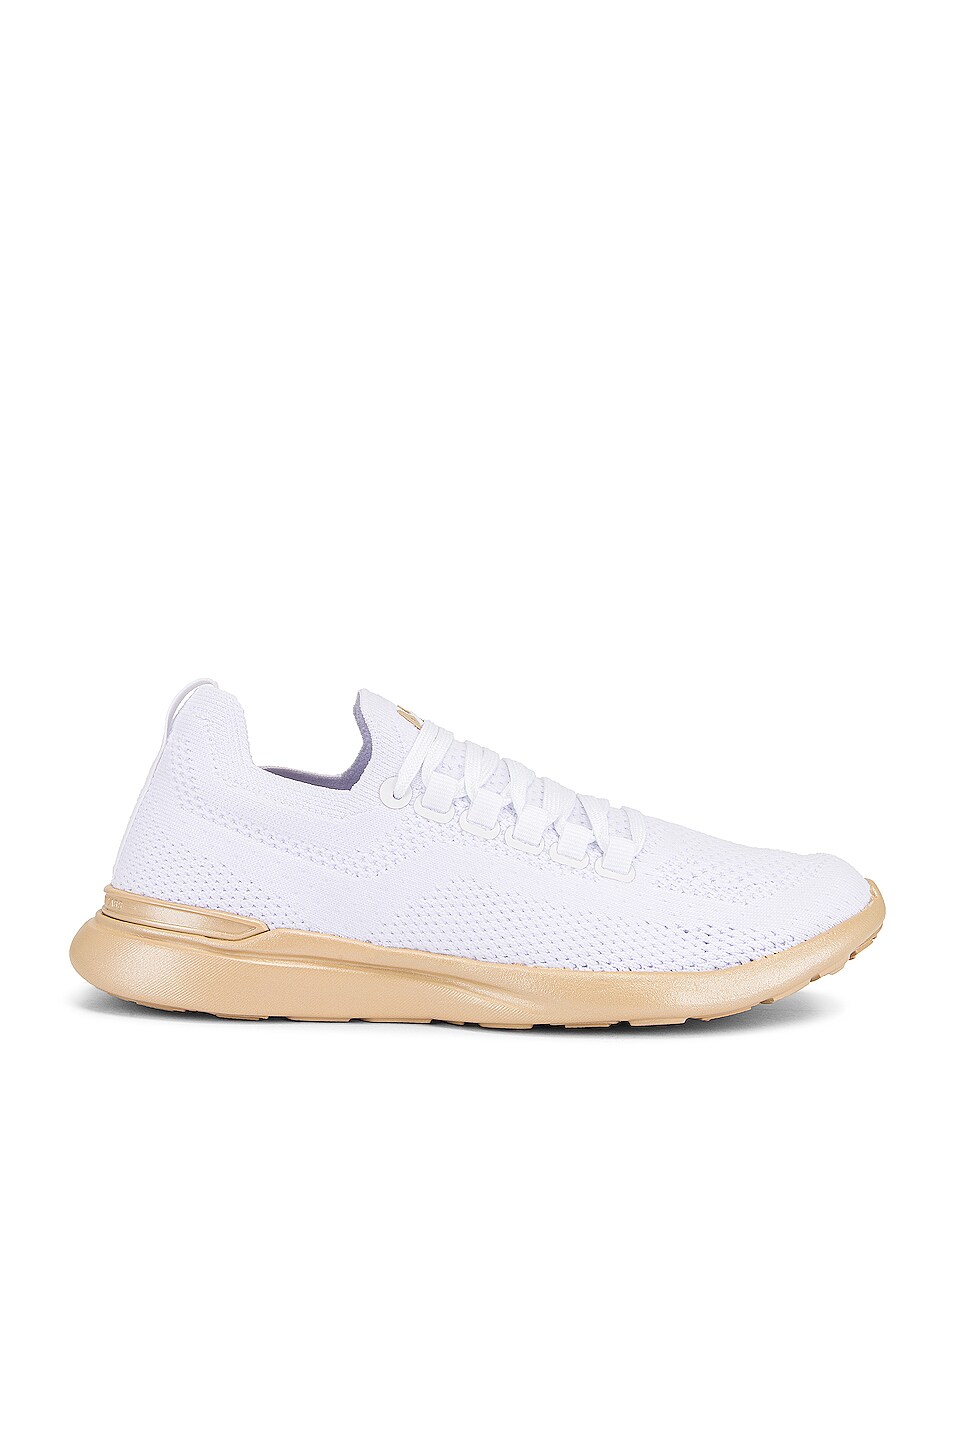 Image 1 of APL: Athletic Propulsion Labs TechLoom Breeze Sneaker in White & Champagne